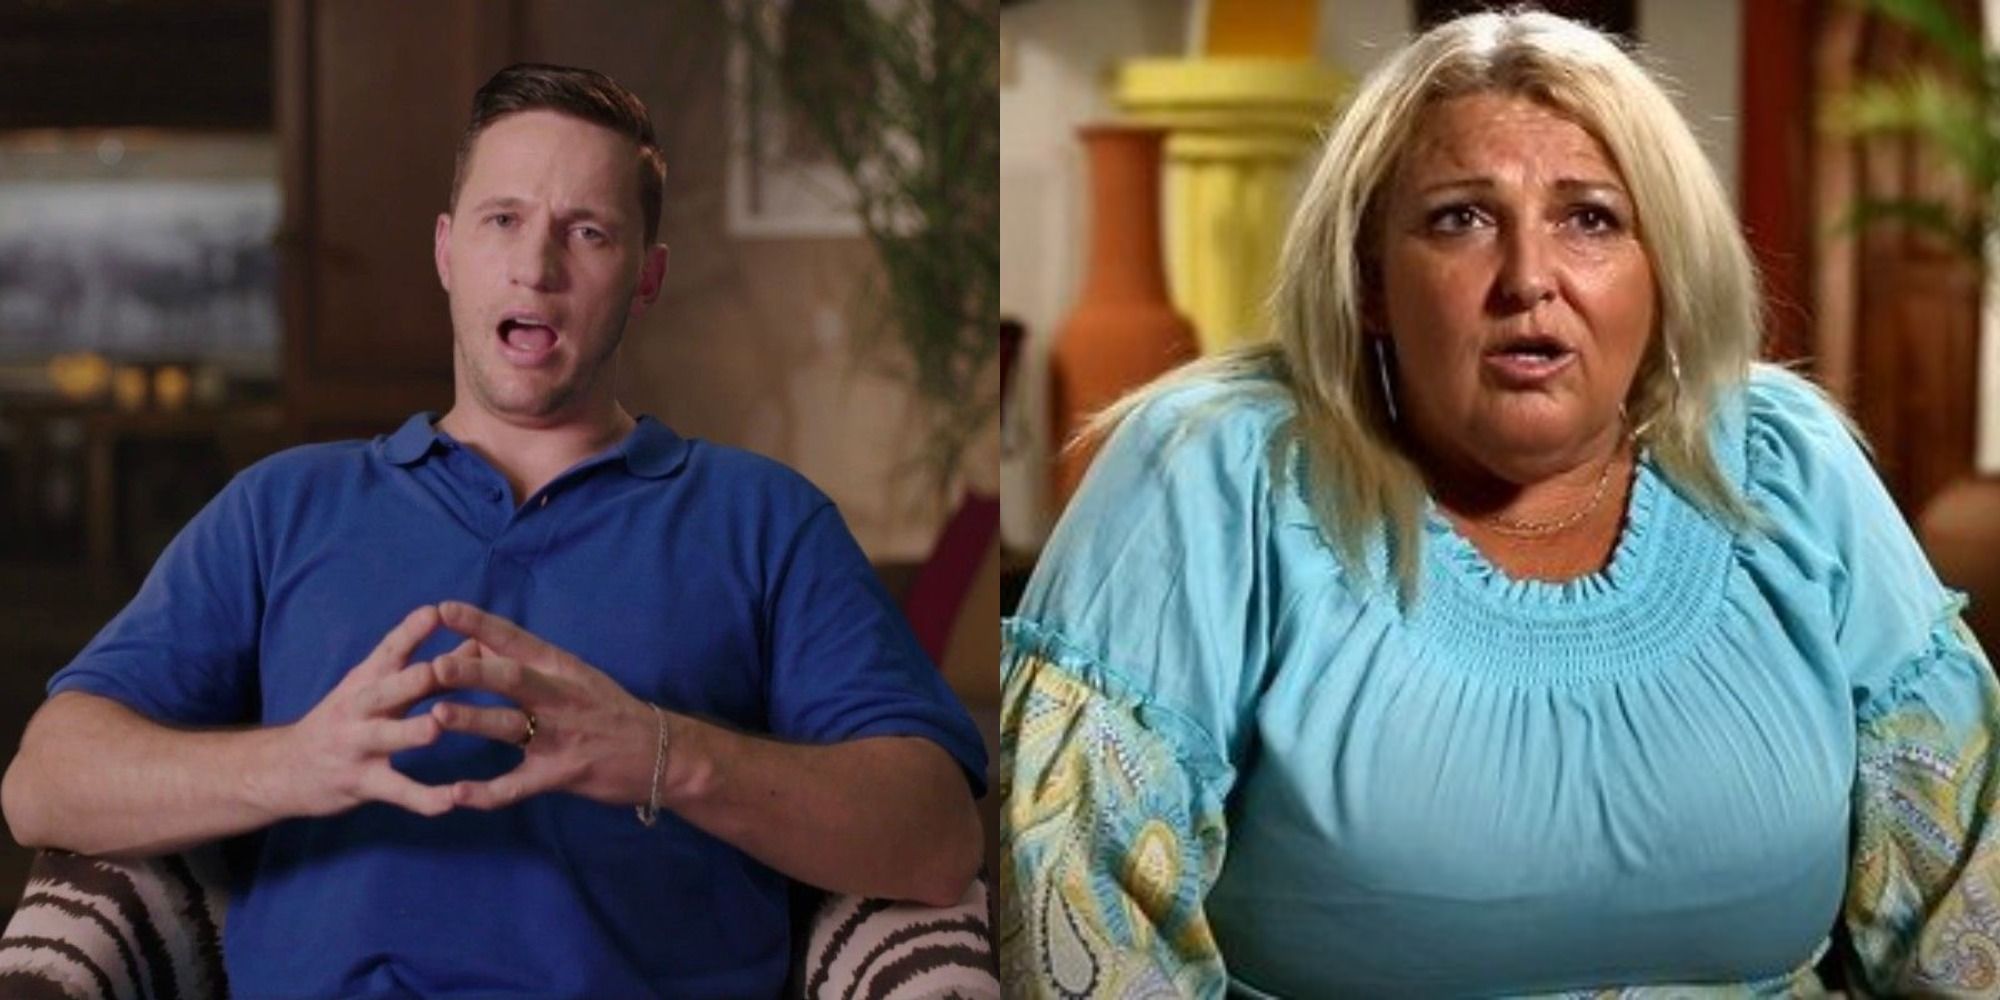 10 Times 90 Day Fiancé Tackled Deep Issues